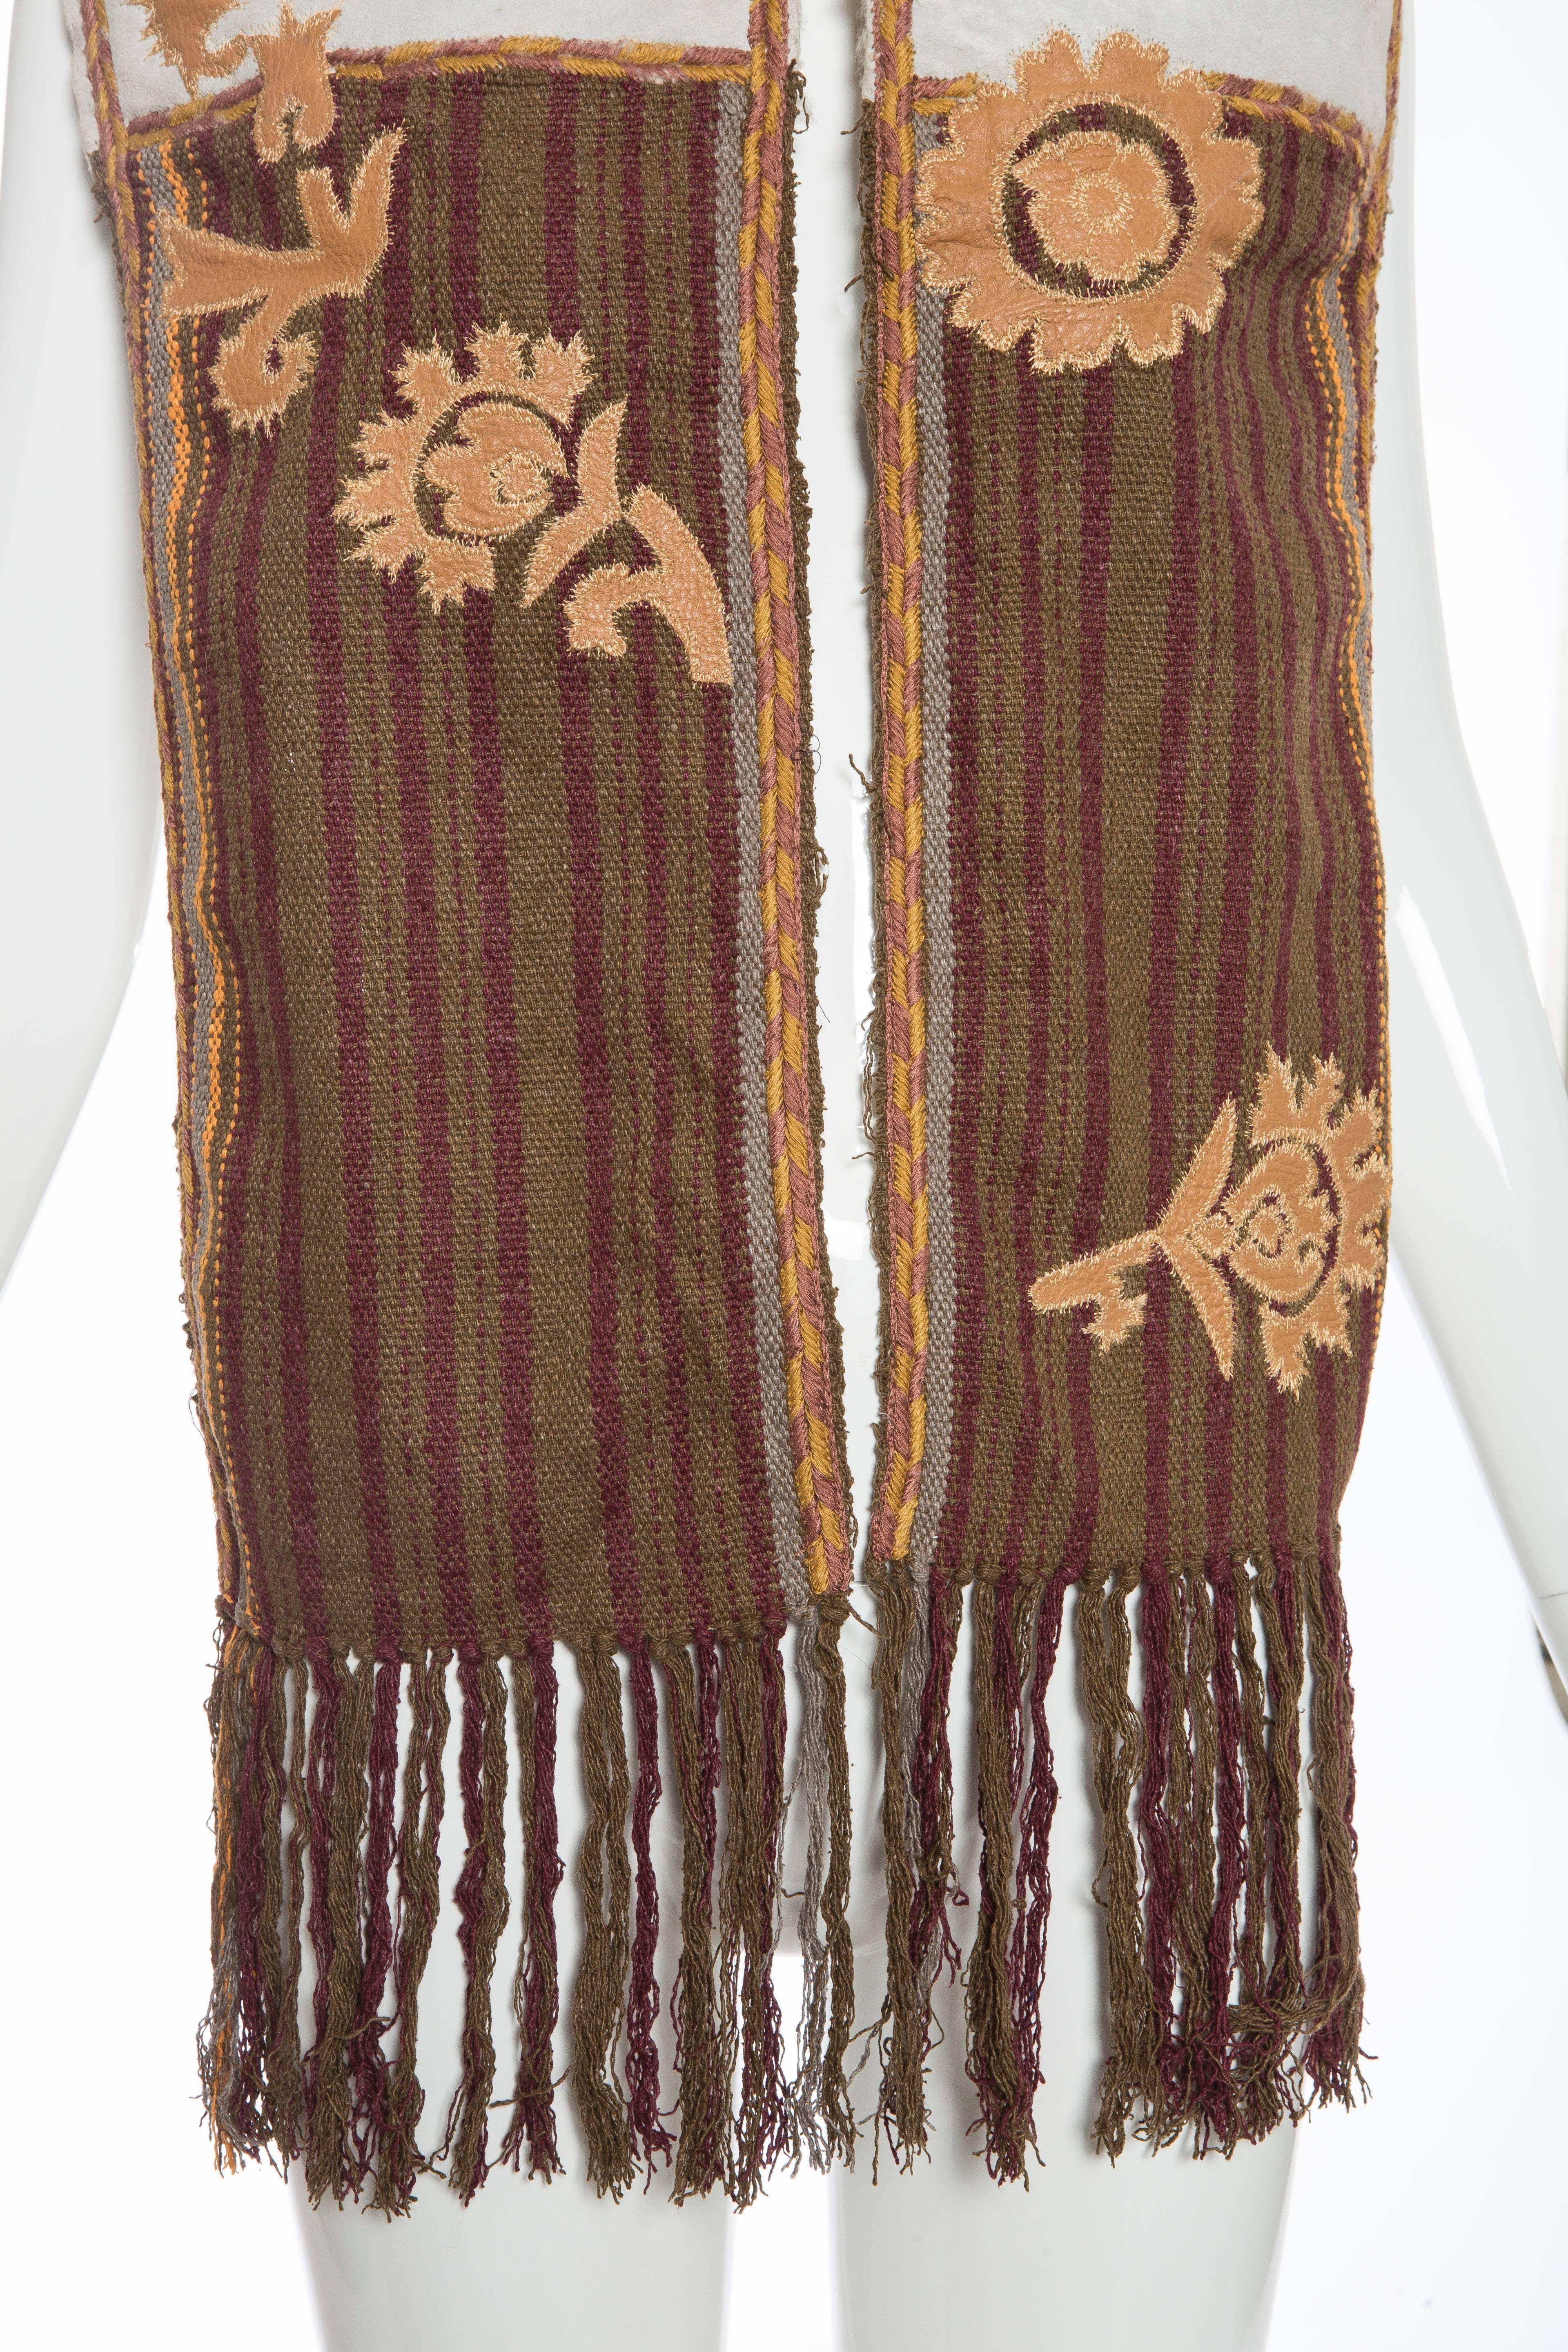 Dries van Noten Runway Shearling Trim Embroidered Scarf , Fall 2002 For Sale 1